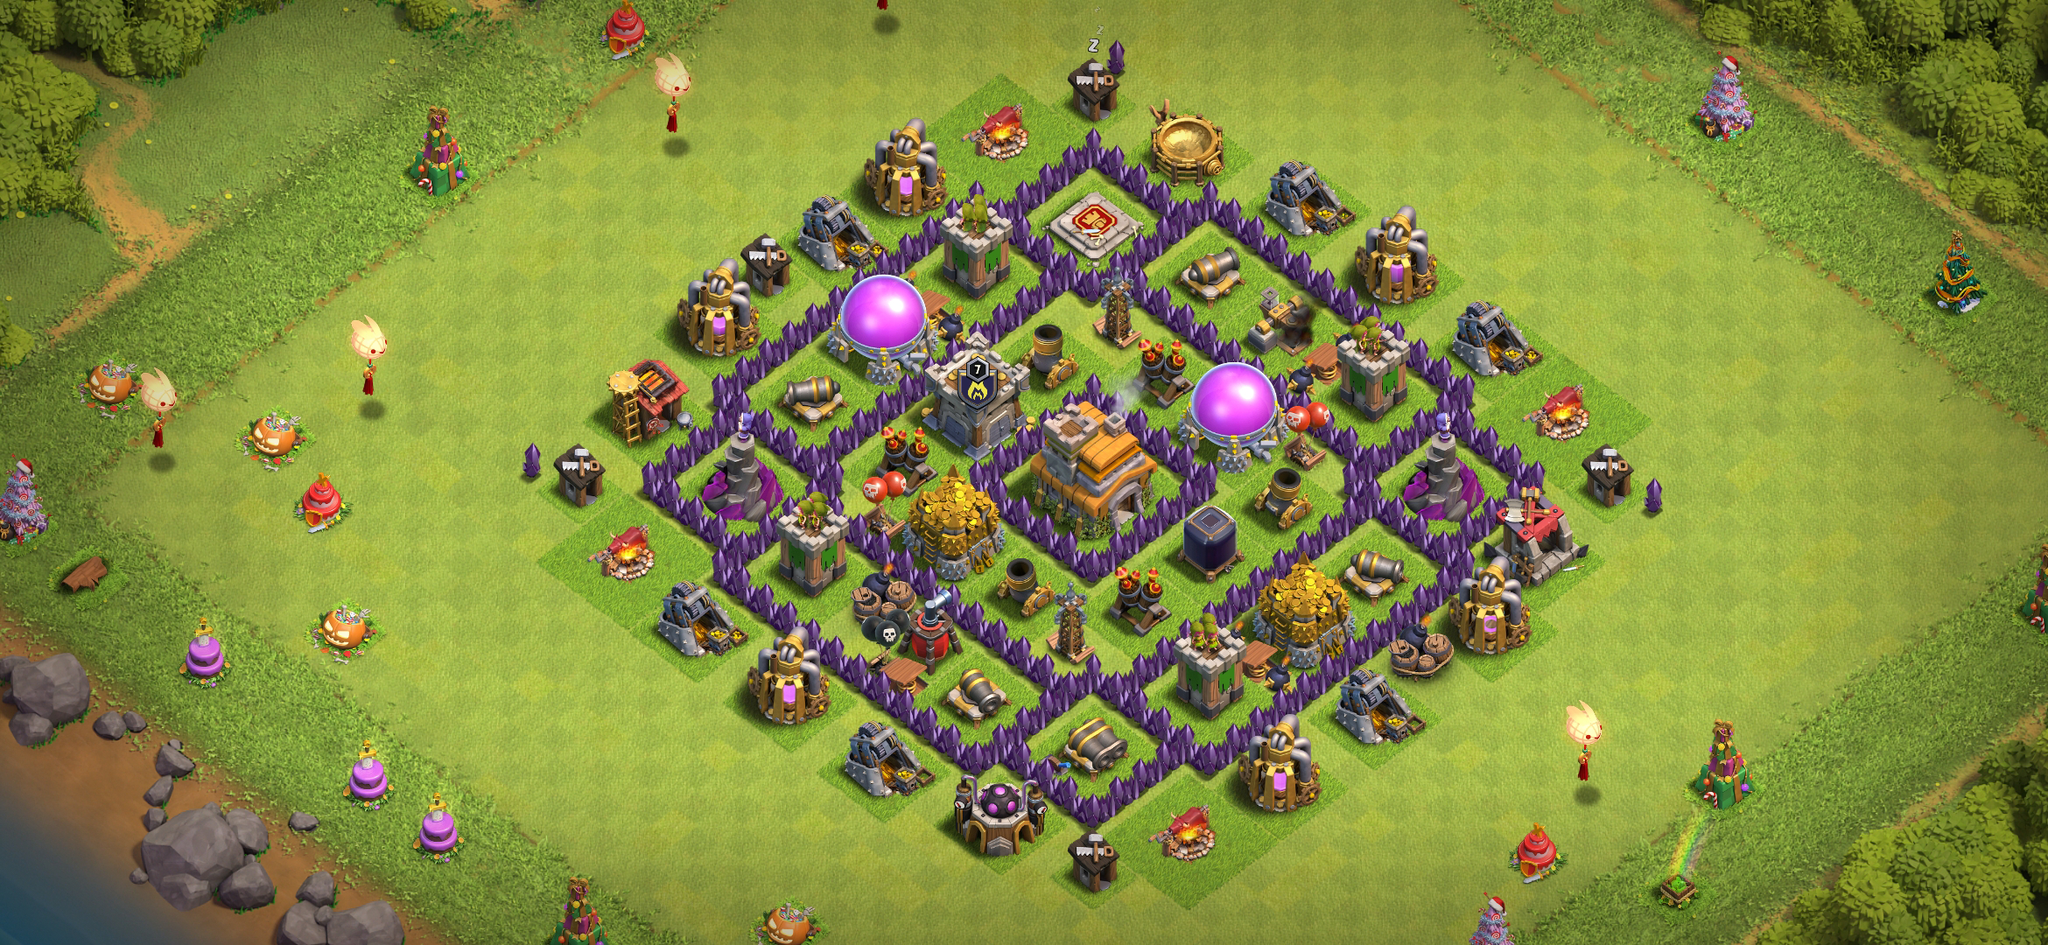 TH7 bases